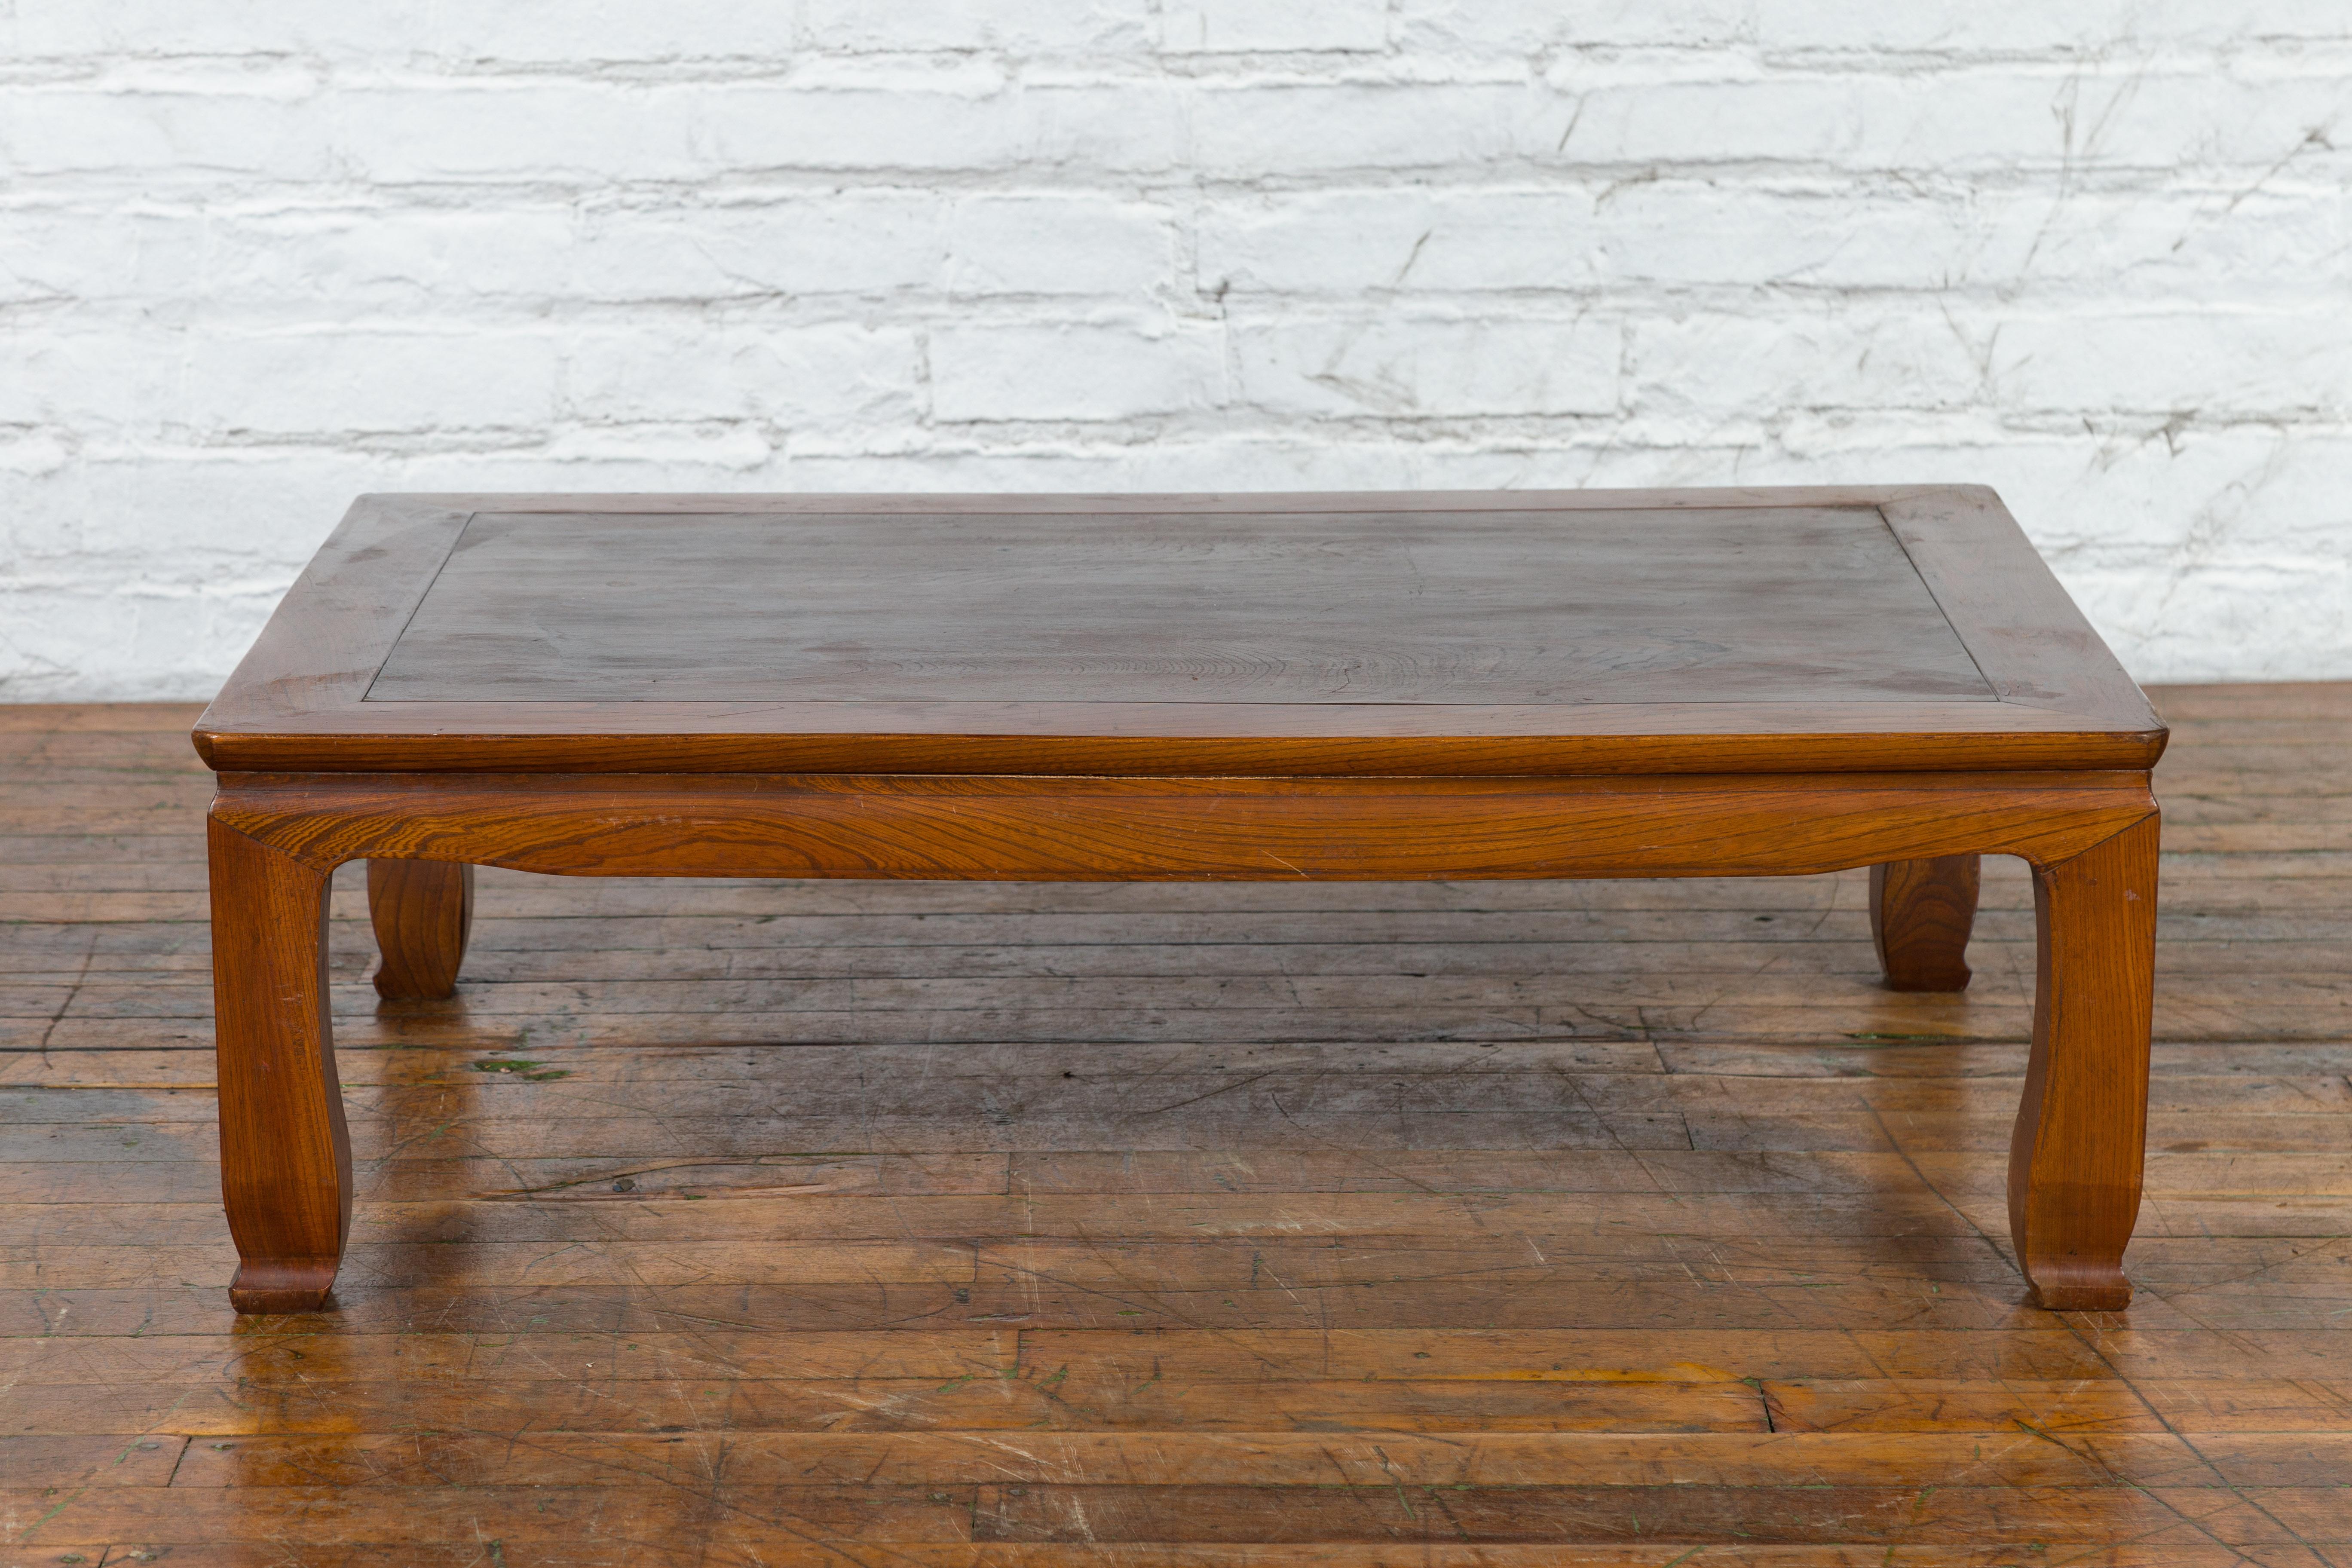 A Chinese vintage low coffee table from the late 20th century, with two-toned top, scalloped apron and scrolling feet. Created in China during the second half of the 20th century, this vintage coffee table features a rectangular top with darker